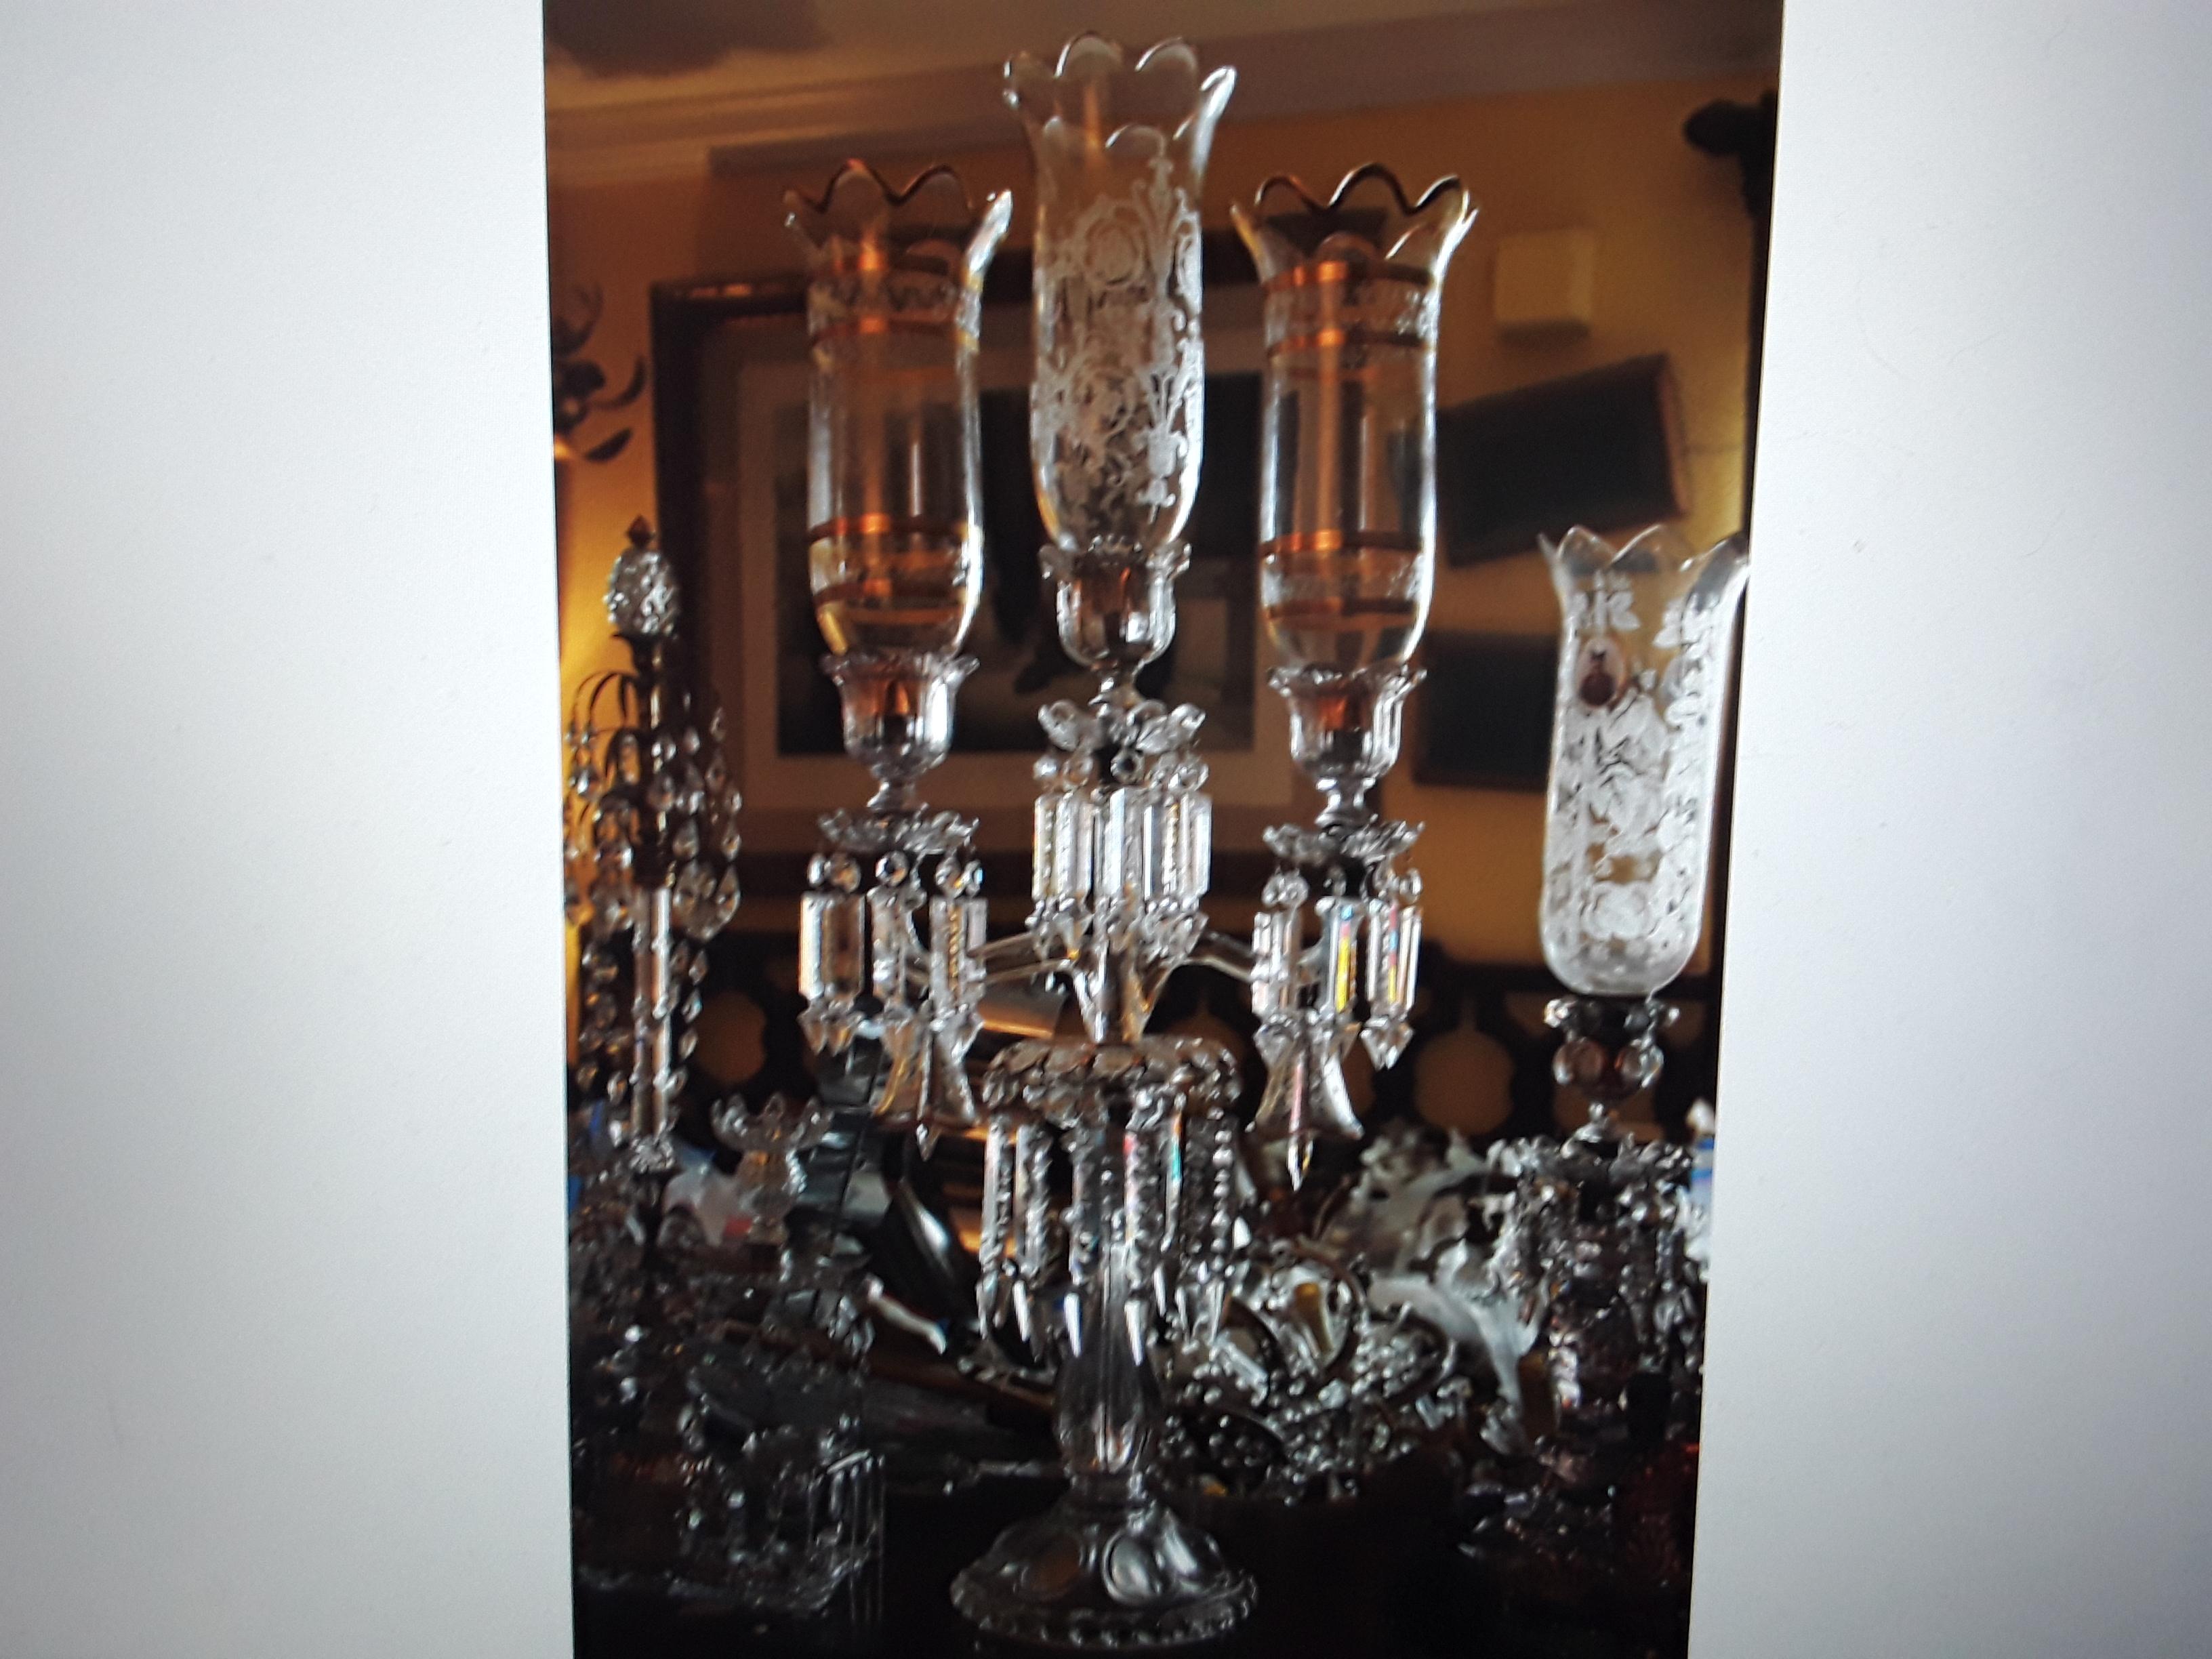 1890 French Antique Napoleon III Signed Baccarat Candelabrum/Candle Holder Large In Good Condition For Sale In Opa Locka, FL